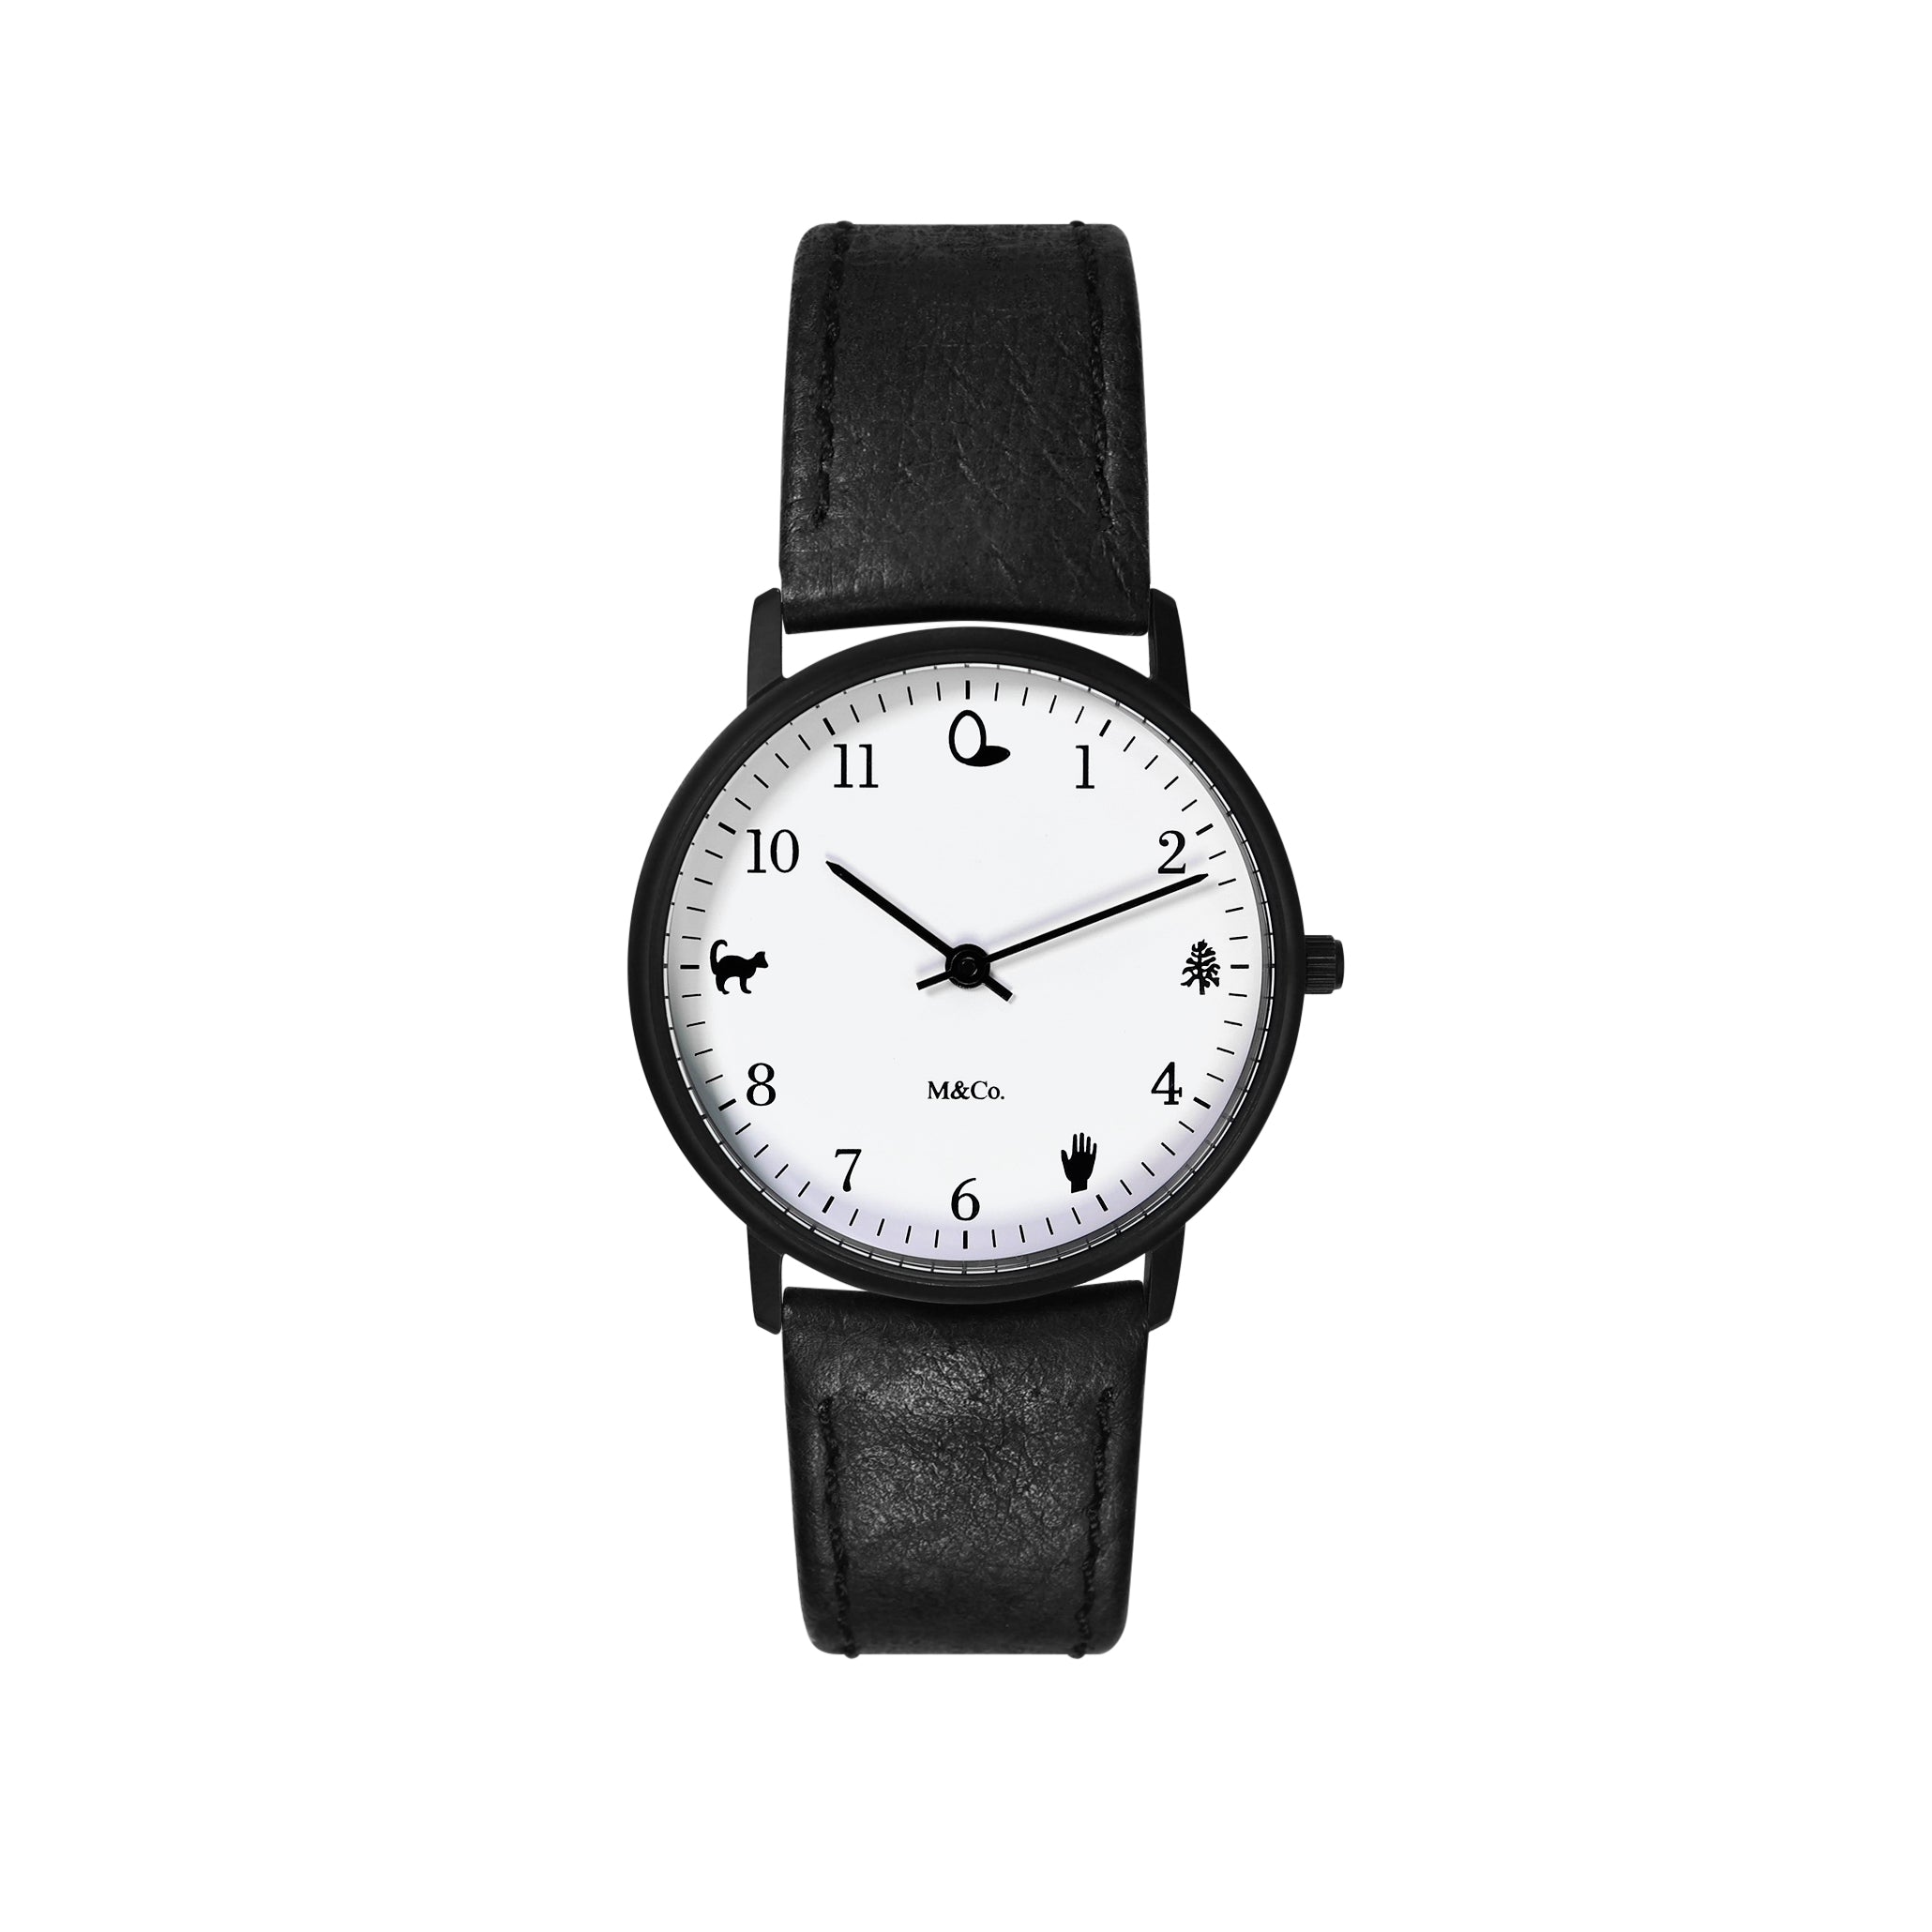 Onomatopoeia - Projects Watches